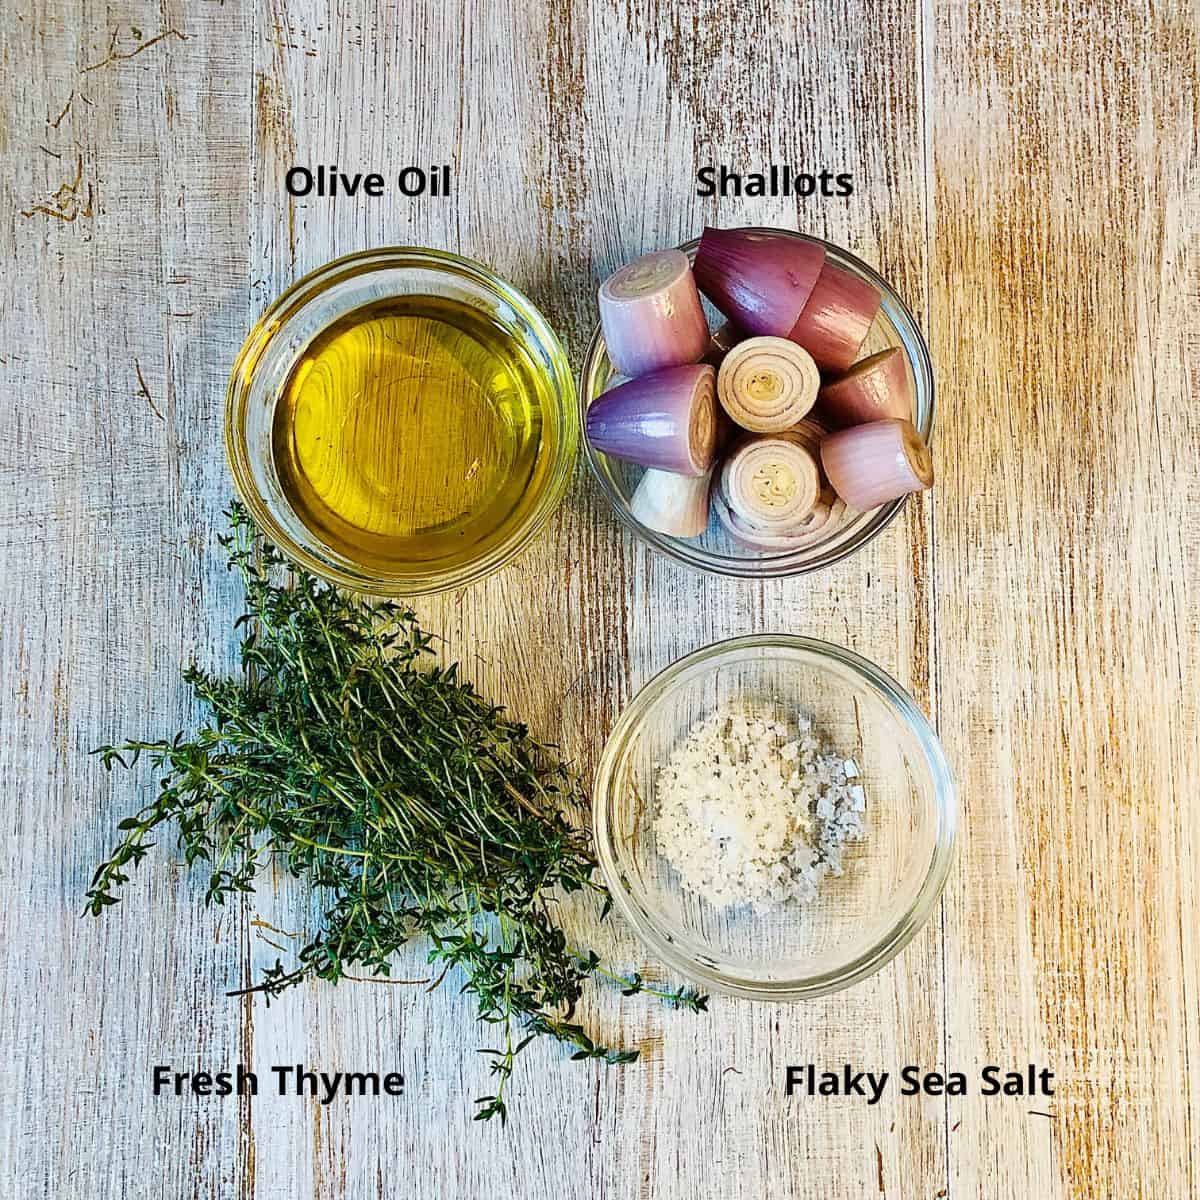 Prepared ingredients for confit shallots in small glass dishes. Annotated. Fresh thyme, flaky sea salt, olive oil and shallots.